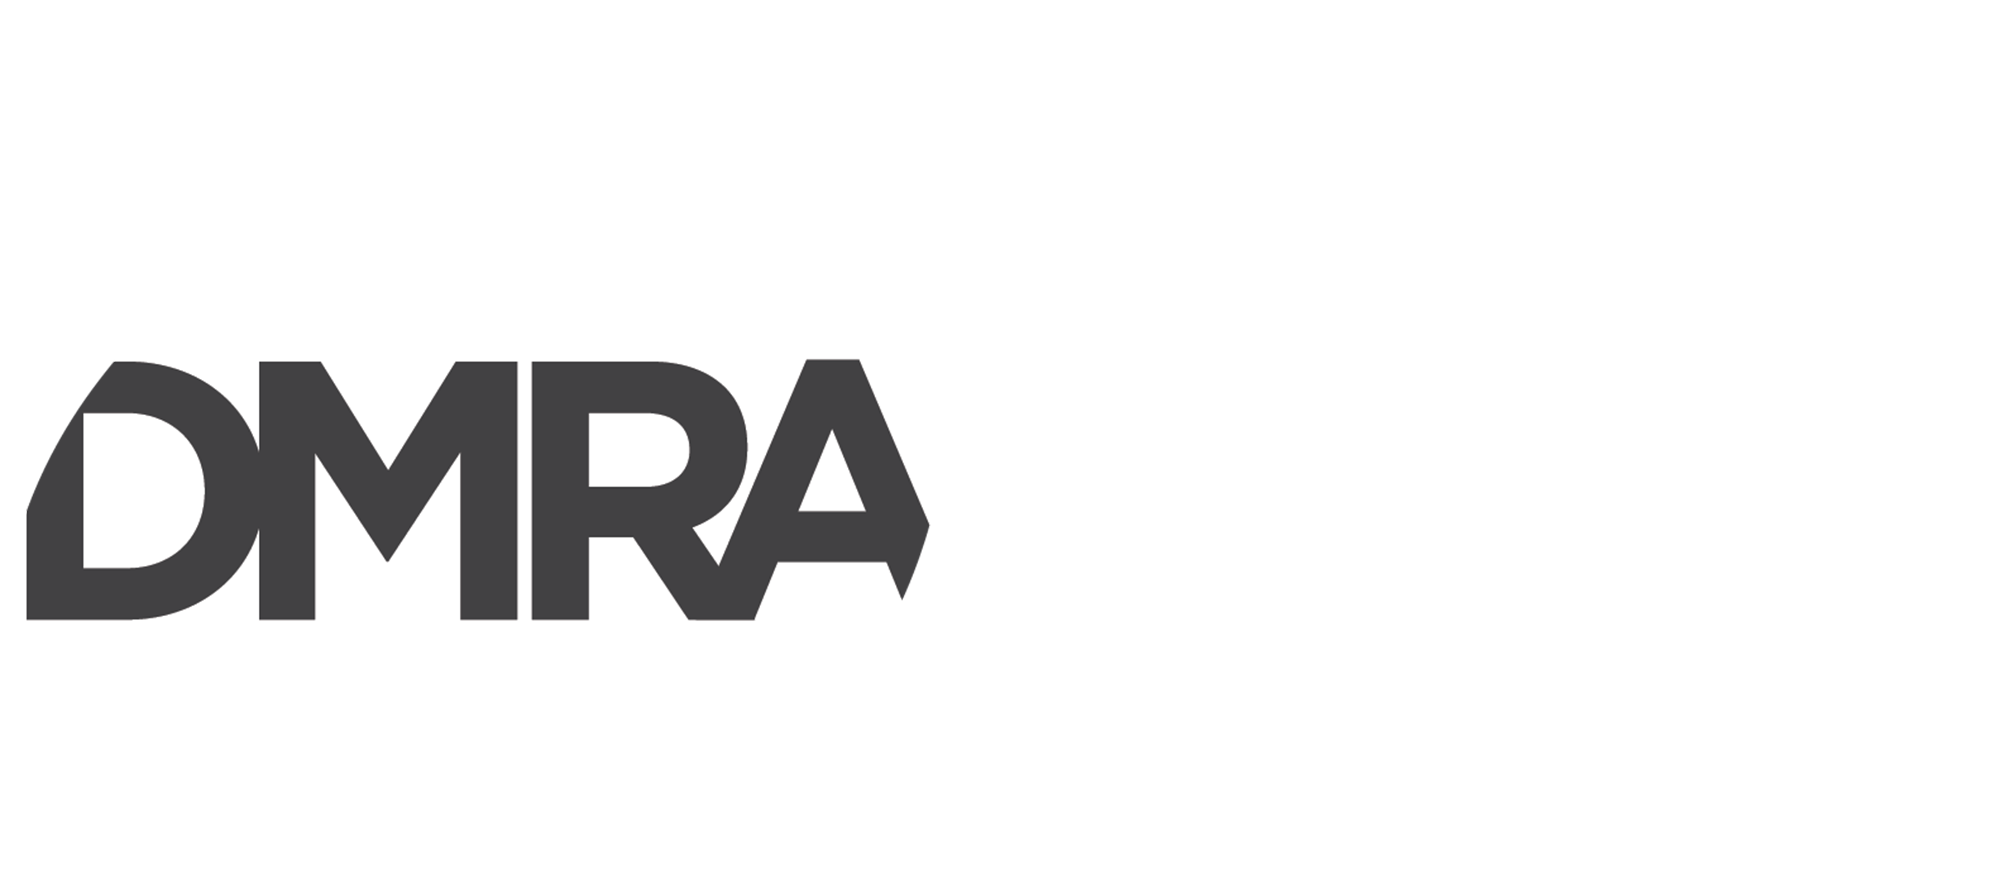 white discount metal roofing logo